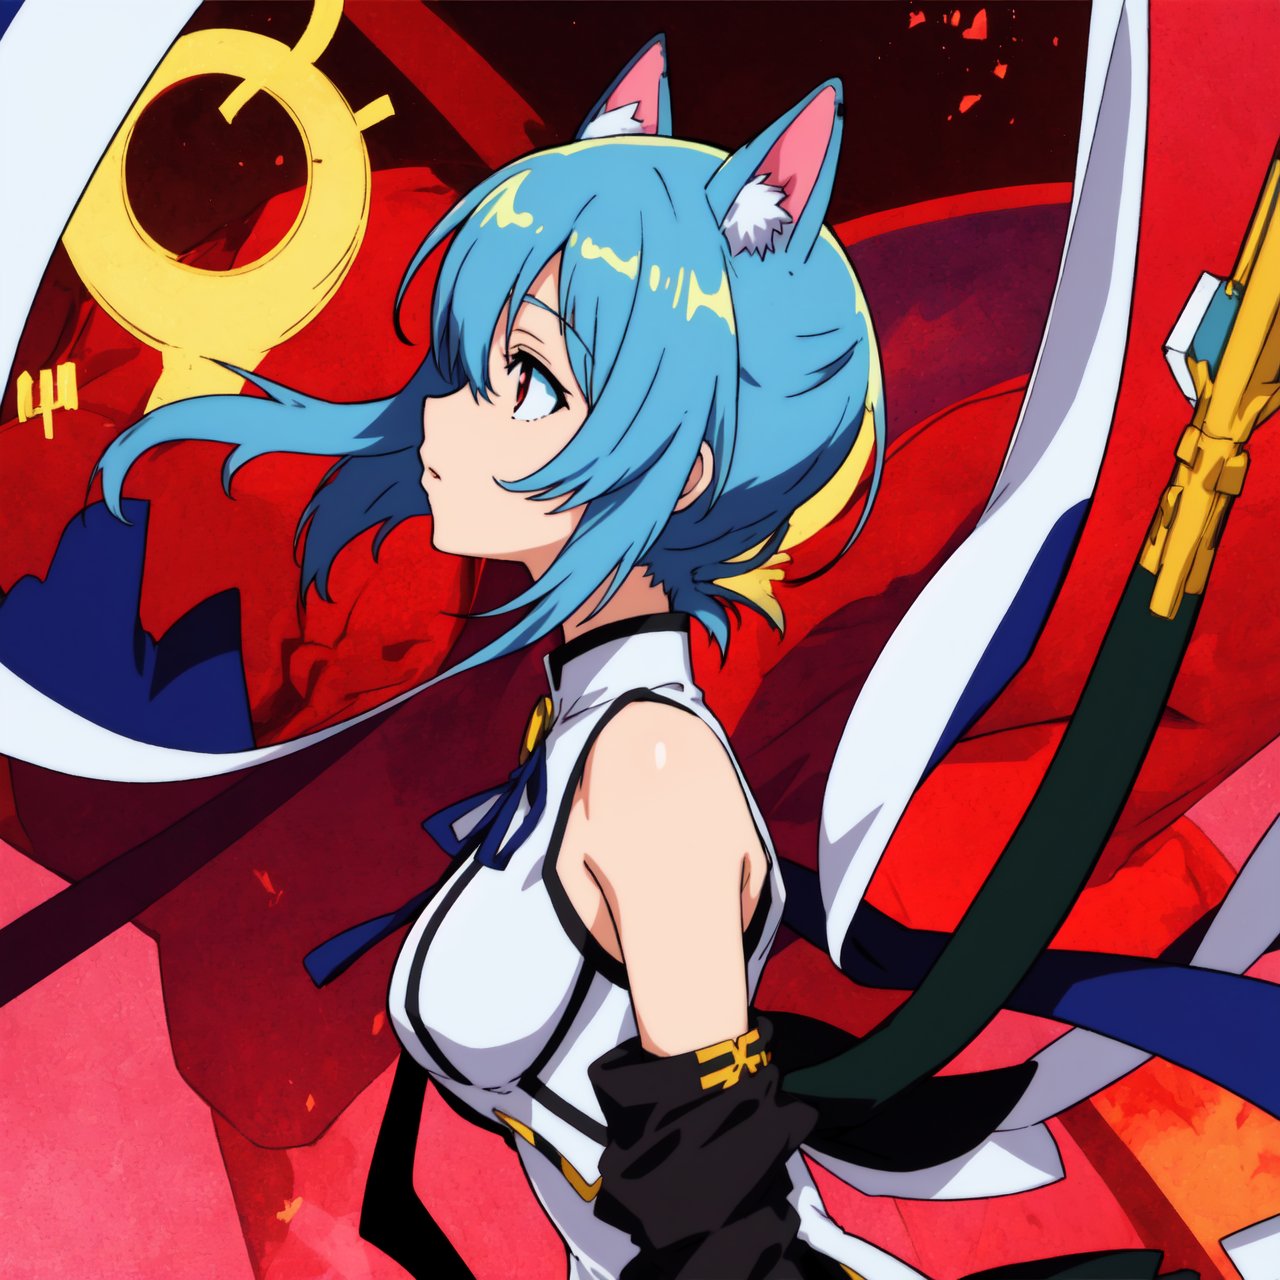 anime girl with blue hair and ears with a cat ears, 2 d anime style, ayanami, 2 d anime, anime moe artstyle, by Shitao, rem rezero, anime style 4 k, 2 d art, 2d art, profile of anime girl, from arknights, by Puru, no type, by Kamagurka, rin